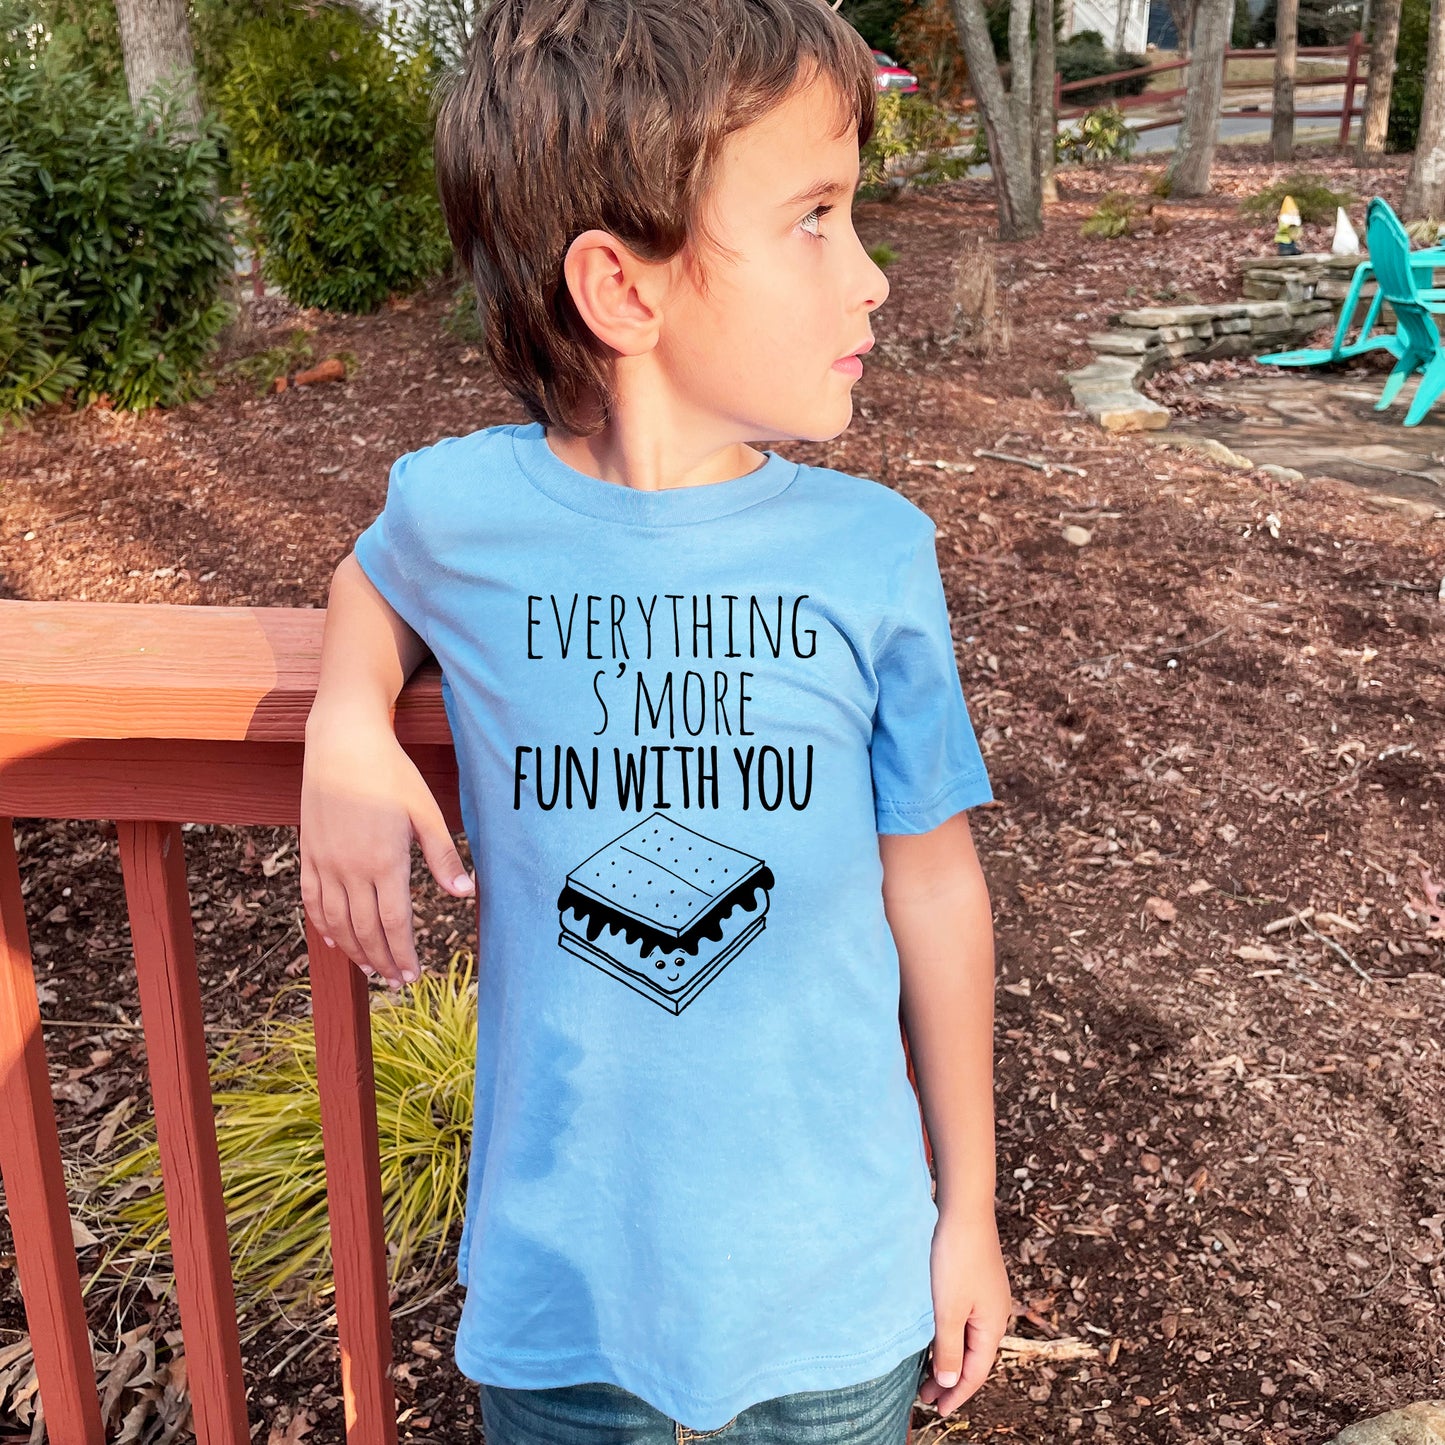 Everything S'more Fun With You - Kid's Tee - Columbia Blue or Lavender